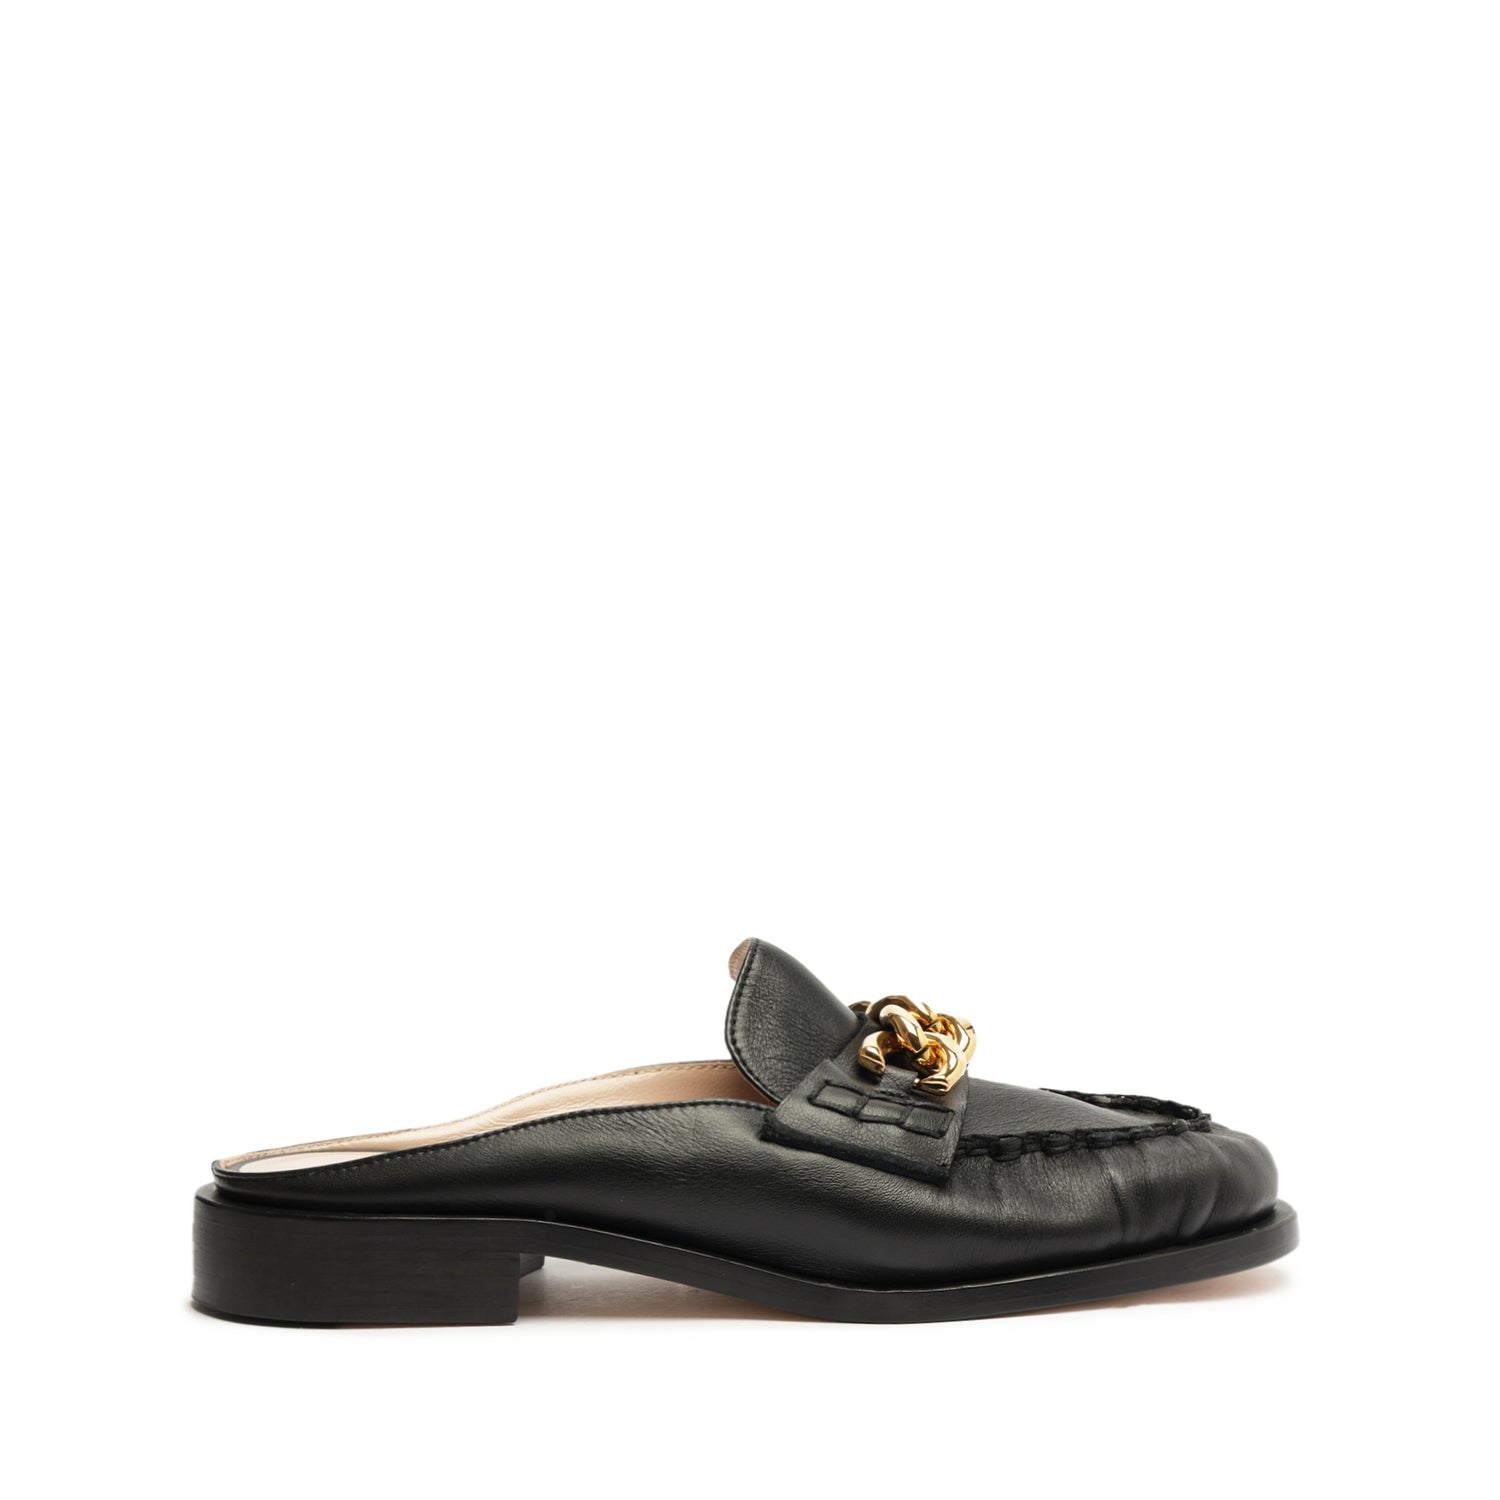 Luca Chain Leather Flat Flats WINTER 23 5 Black Nappa Leather - Schutz Shoes